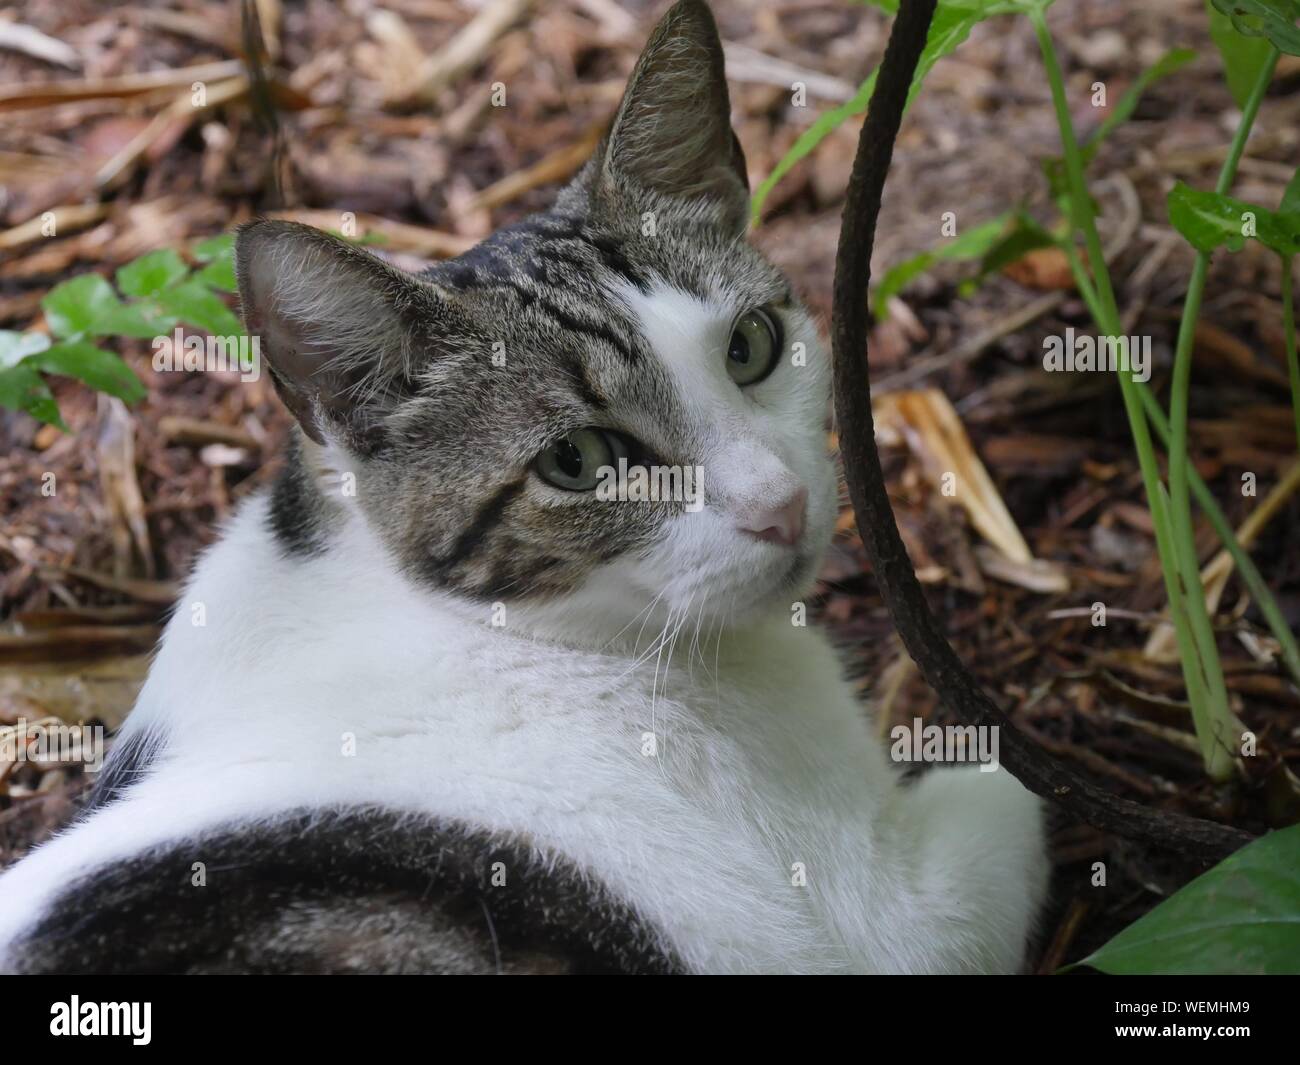 Medium close up of a cute cat relaxing at the Hemingway gardens in Key West, Florida. Stock Photo